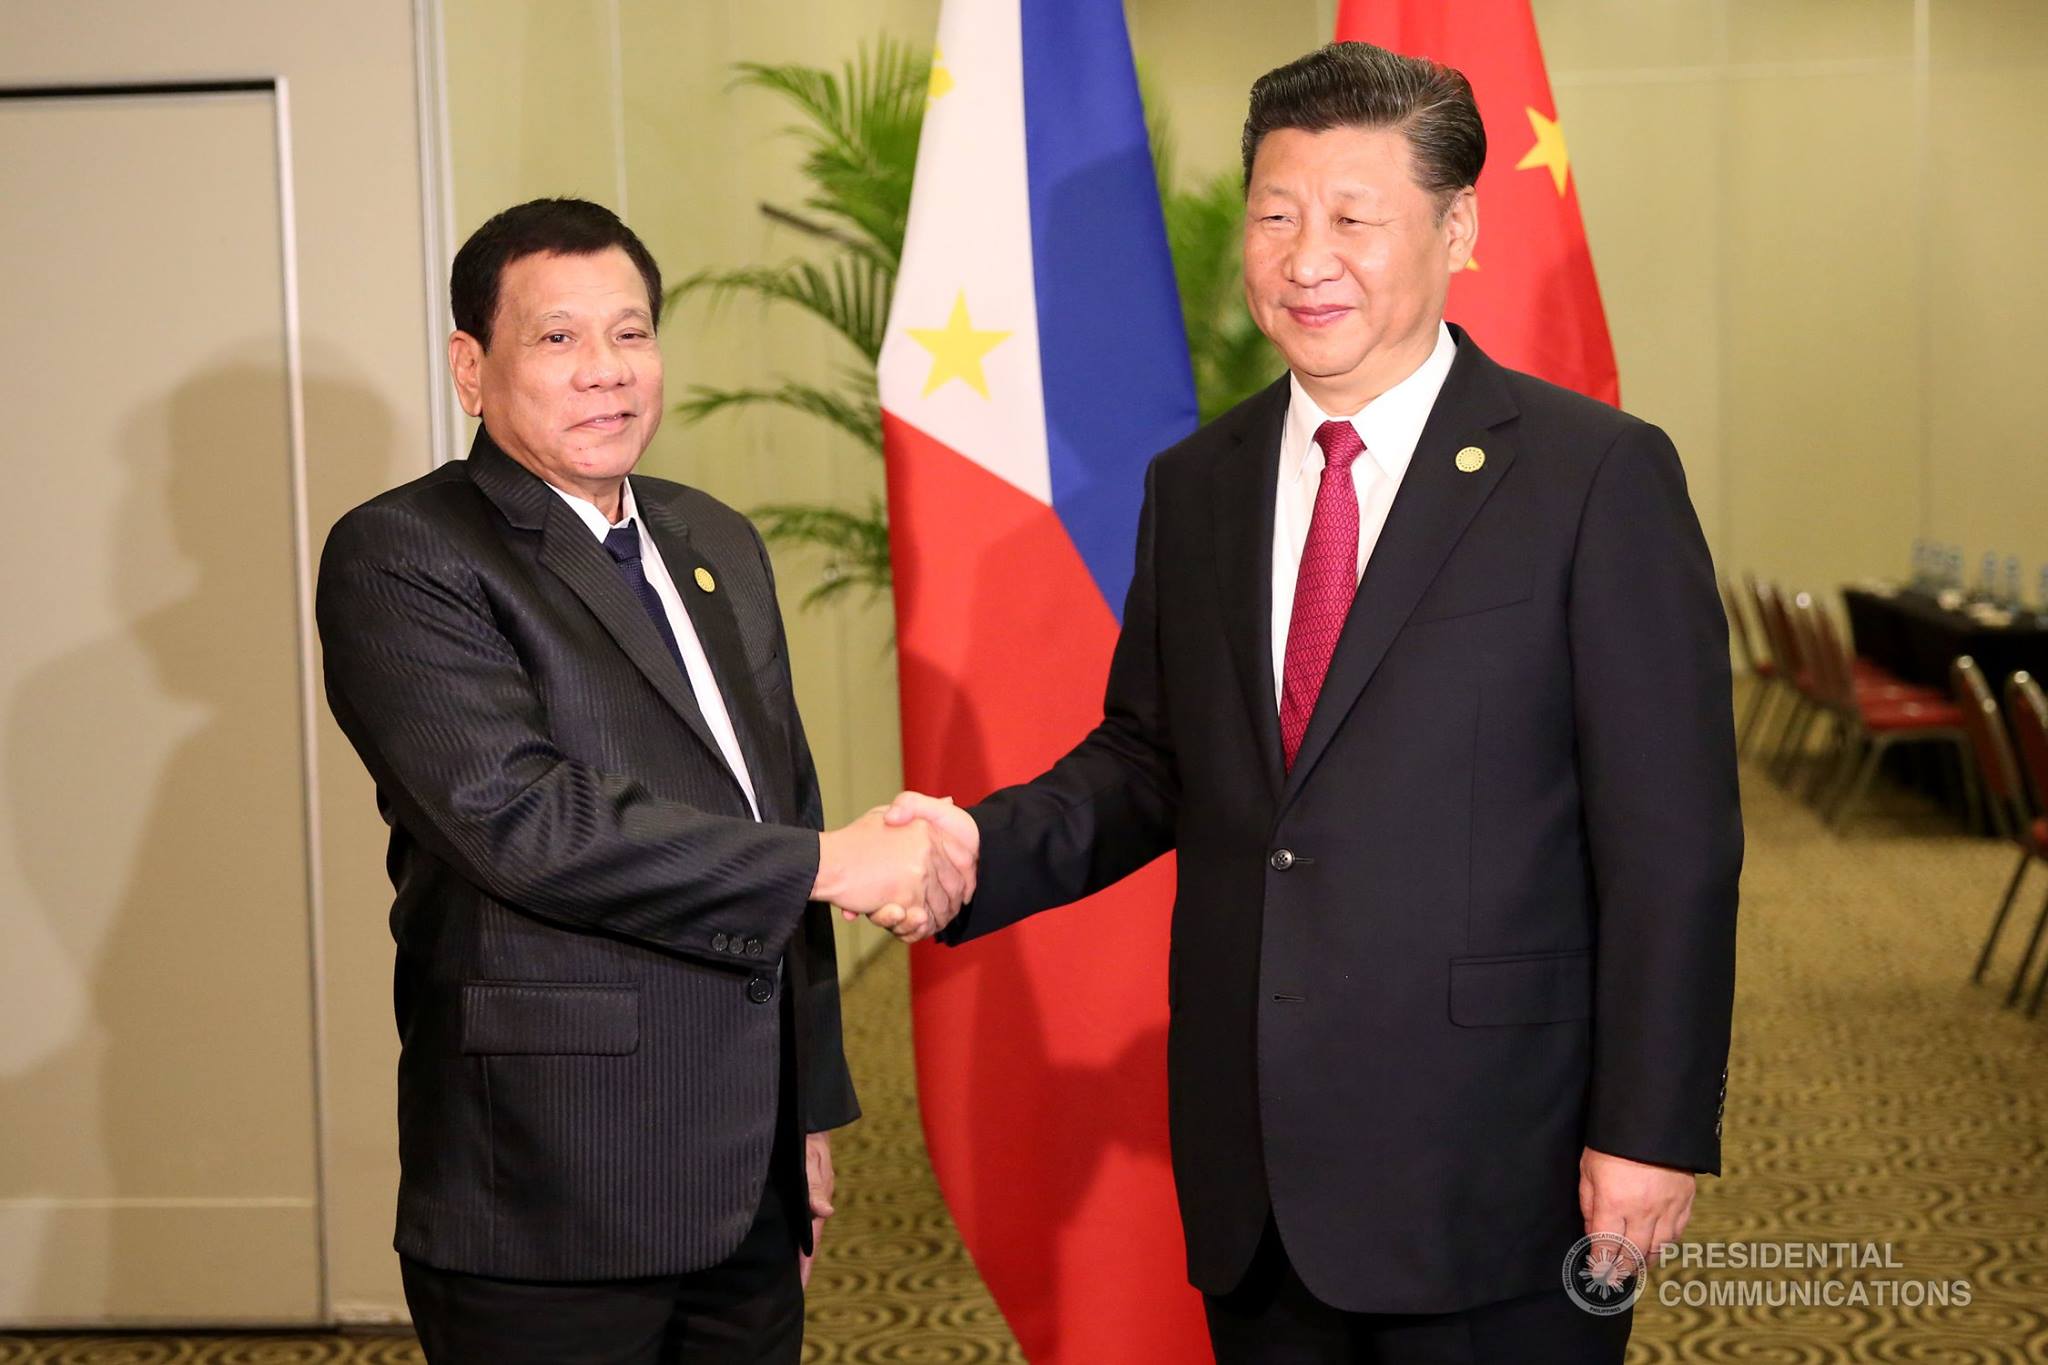 Chinese President Xi Jinping shaking hands with Philippine President Rodrigo Duterte during their meeting at the sidelines of the APEC Leaders' Summit in Lima, Peru.  (Photo courtesy Presidential Communications group)